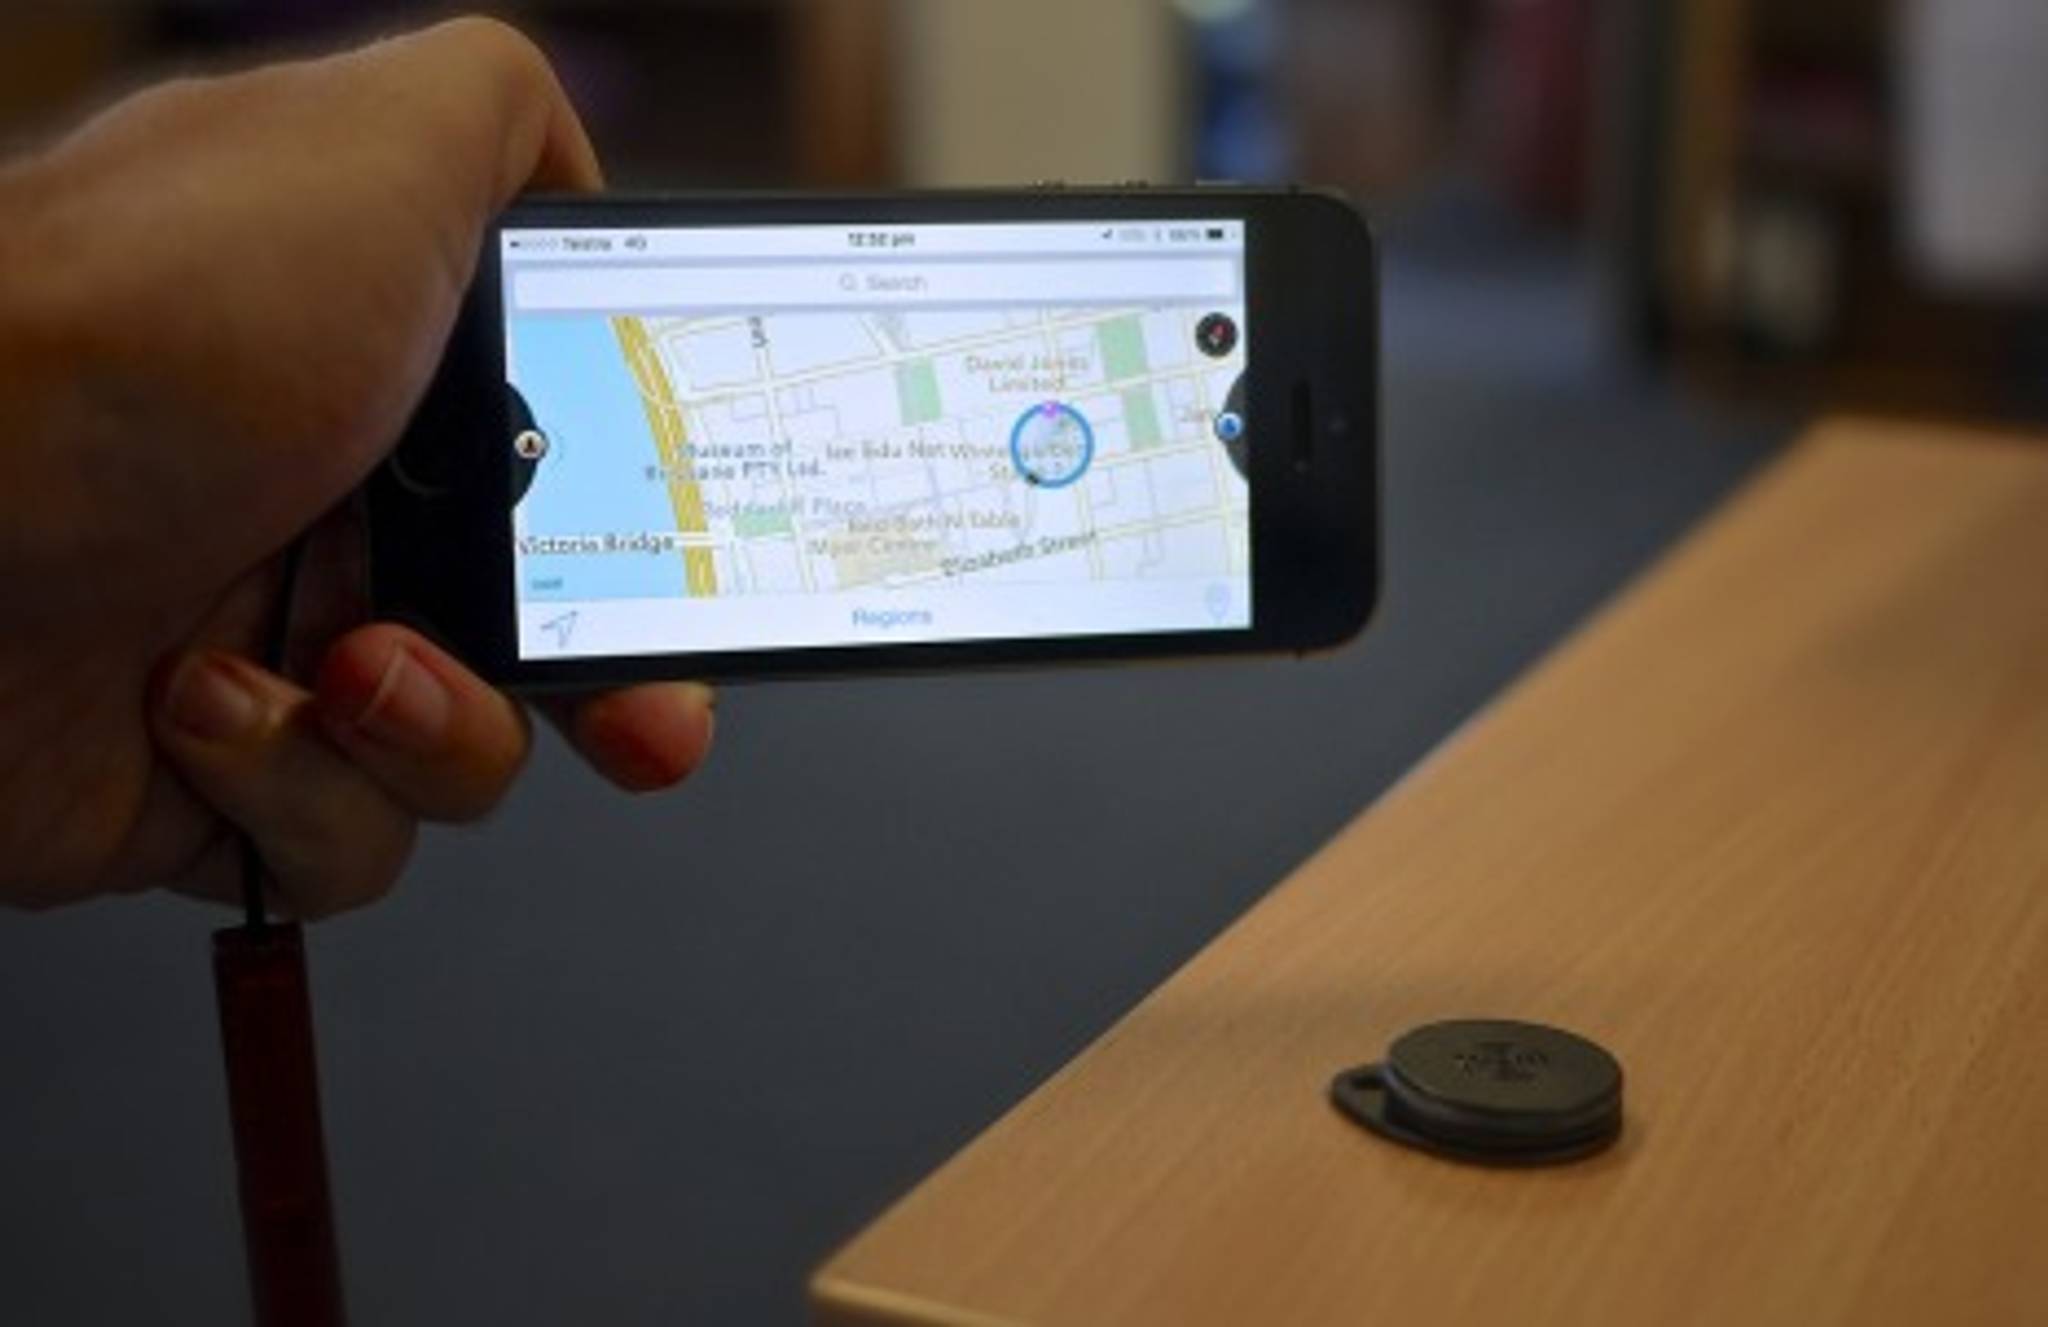 Germany's resistance to the iBeacon